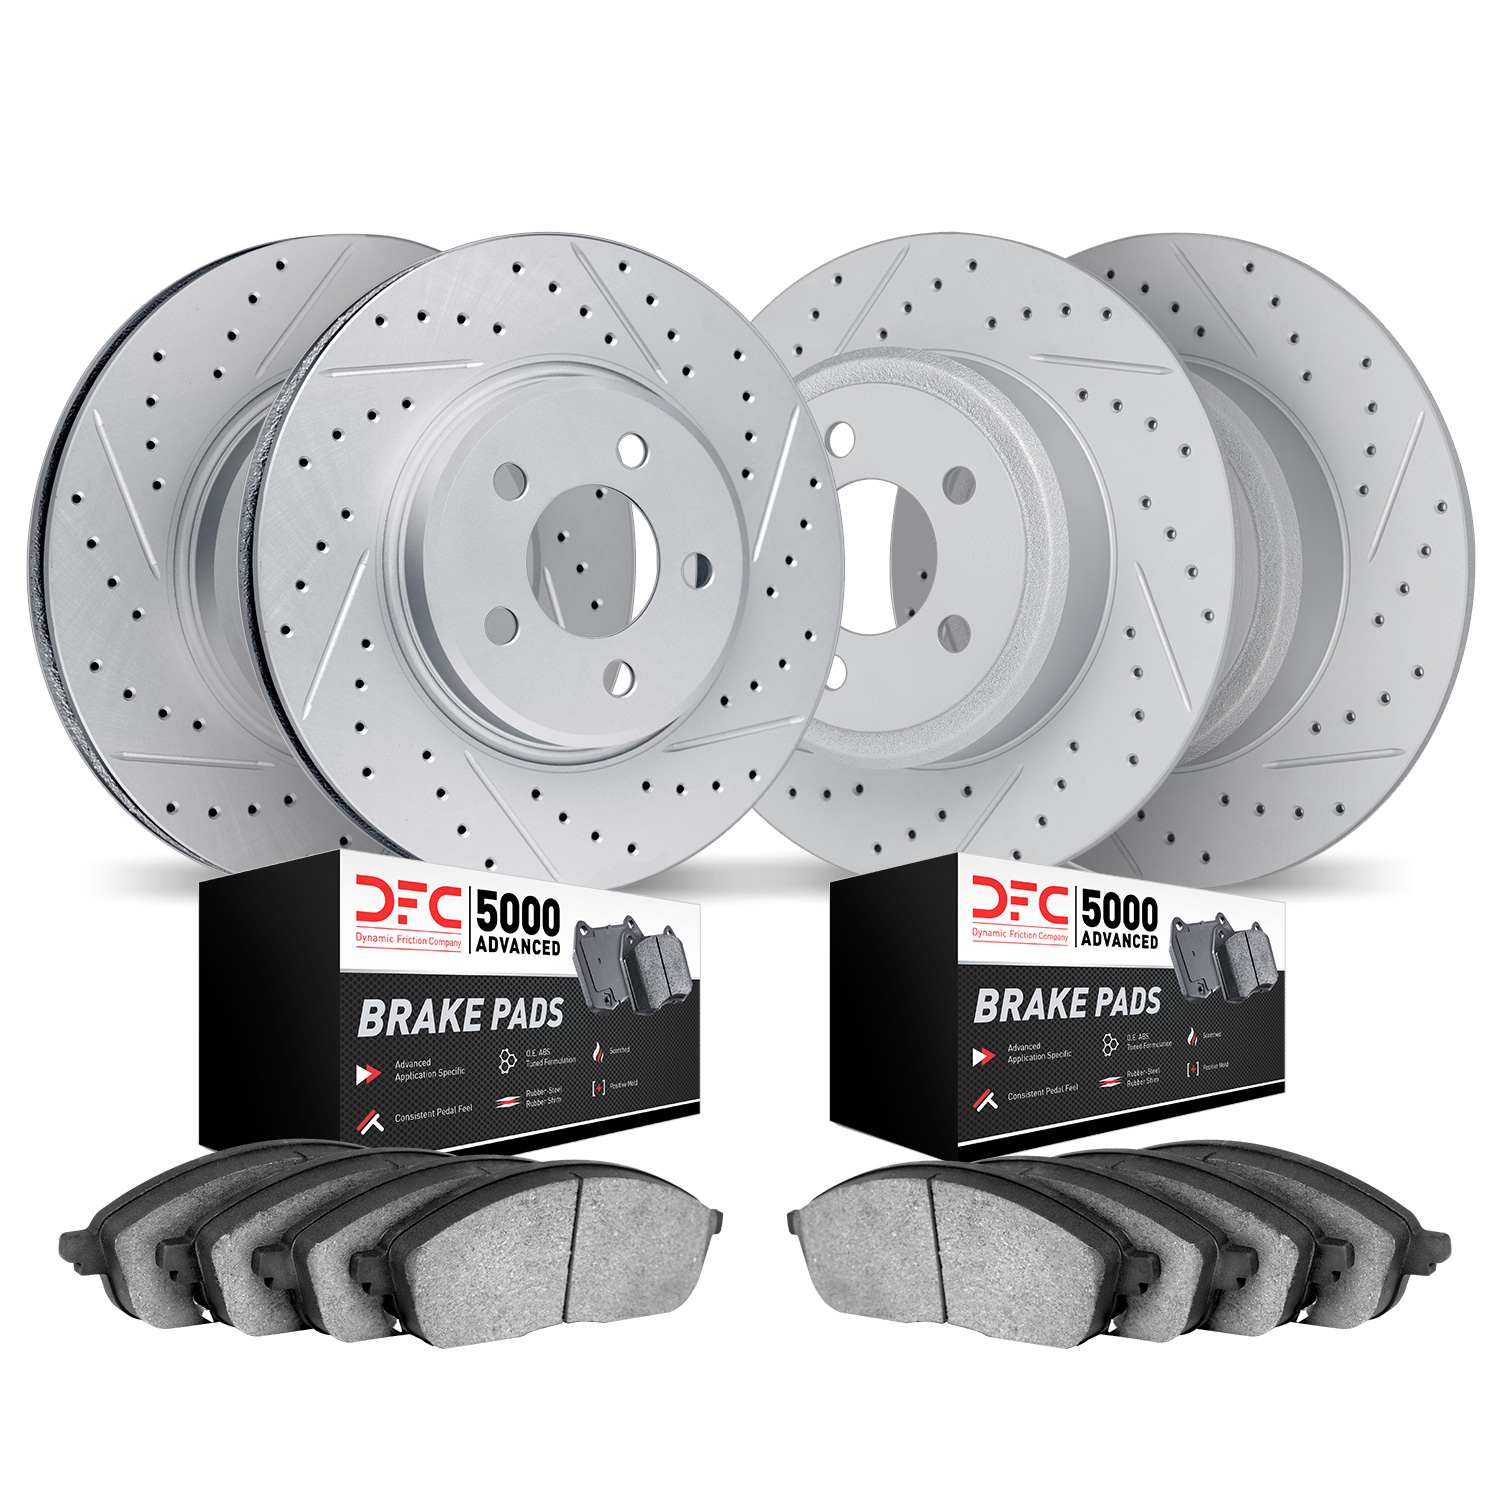 2504-54236 Geoperformance Drilled/Slotted Rotors w/5000 Advanced Brake Pads Kit, 2001-2002 Ford/Lincoln/Mercury/Mazda, Position: